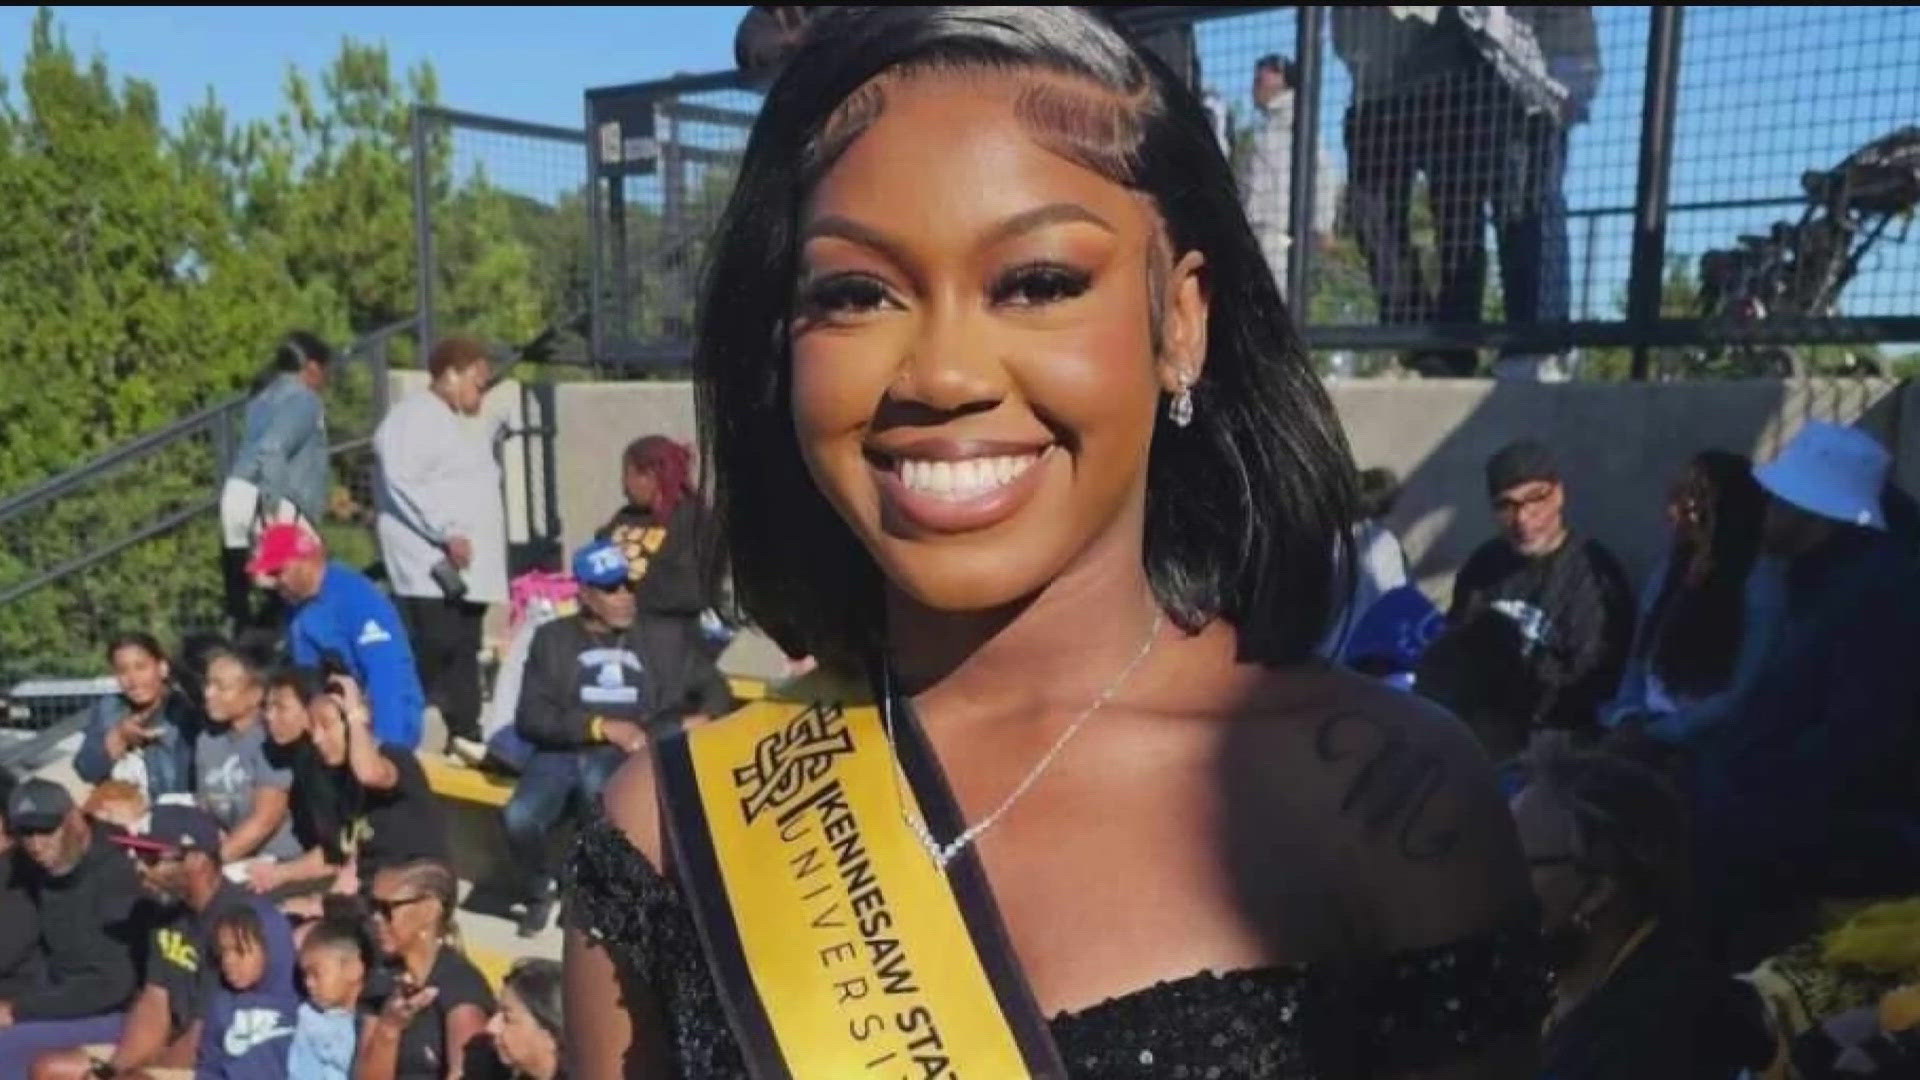 Family has identified 21-year-old Alasia Franklin as the victim in KSU's deadly shooting on Saturday.